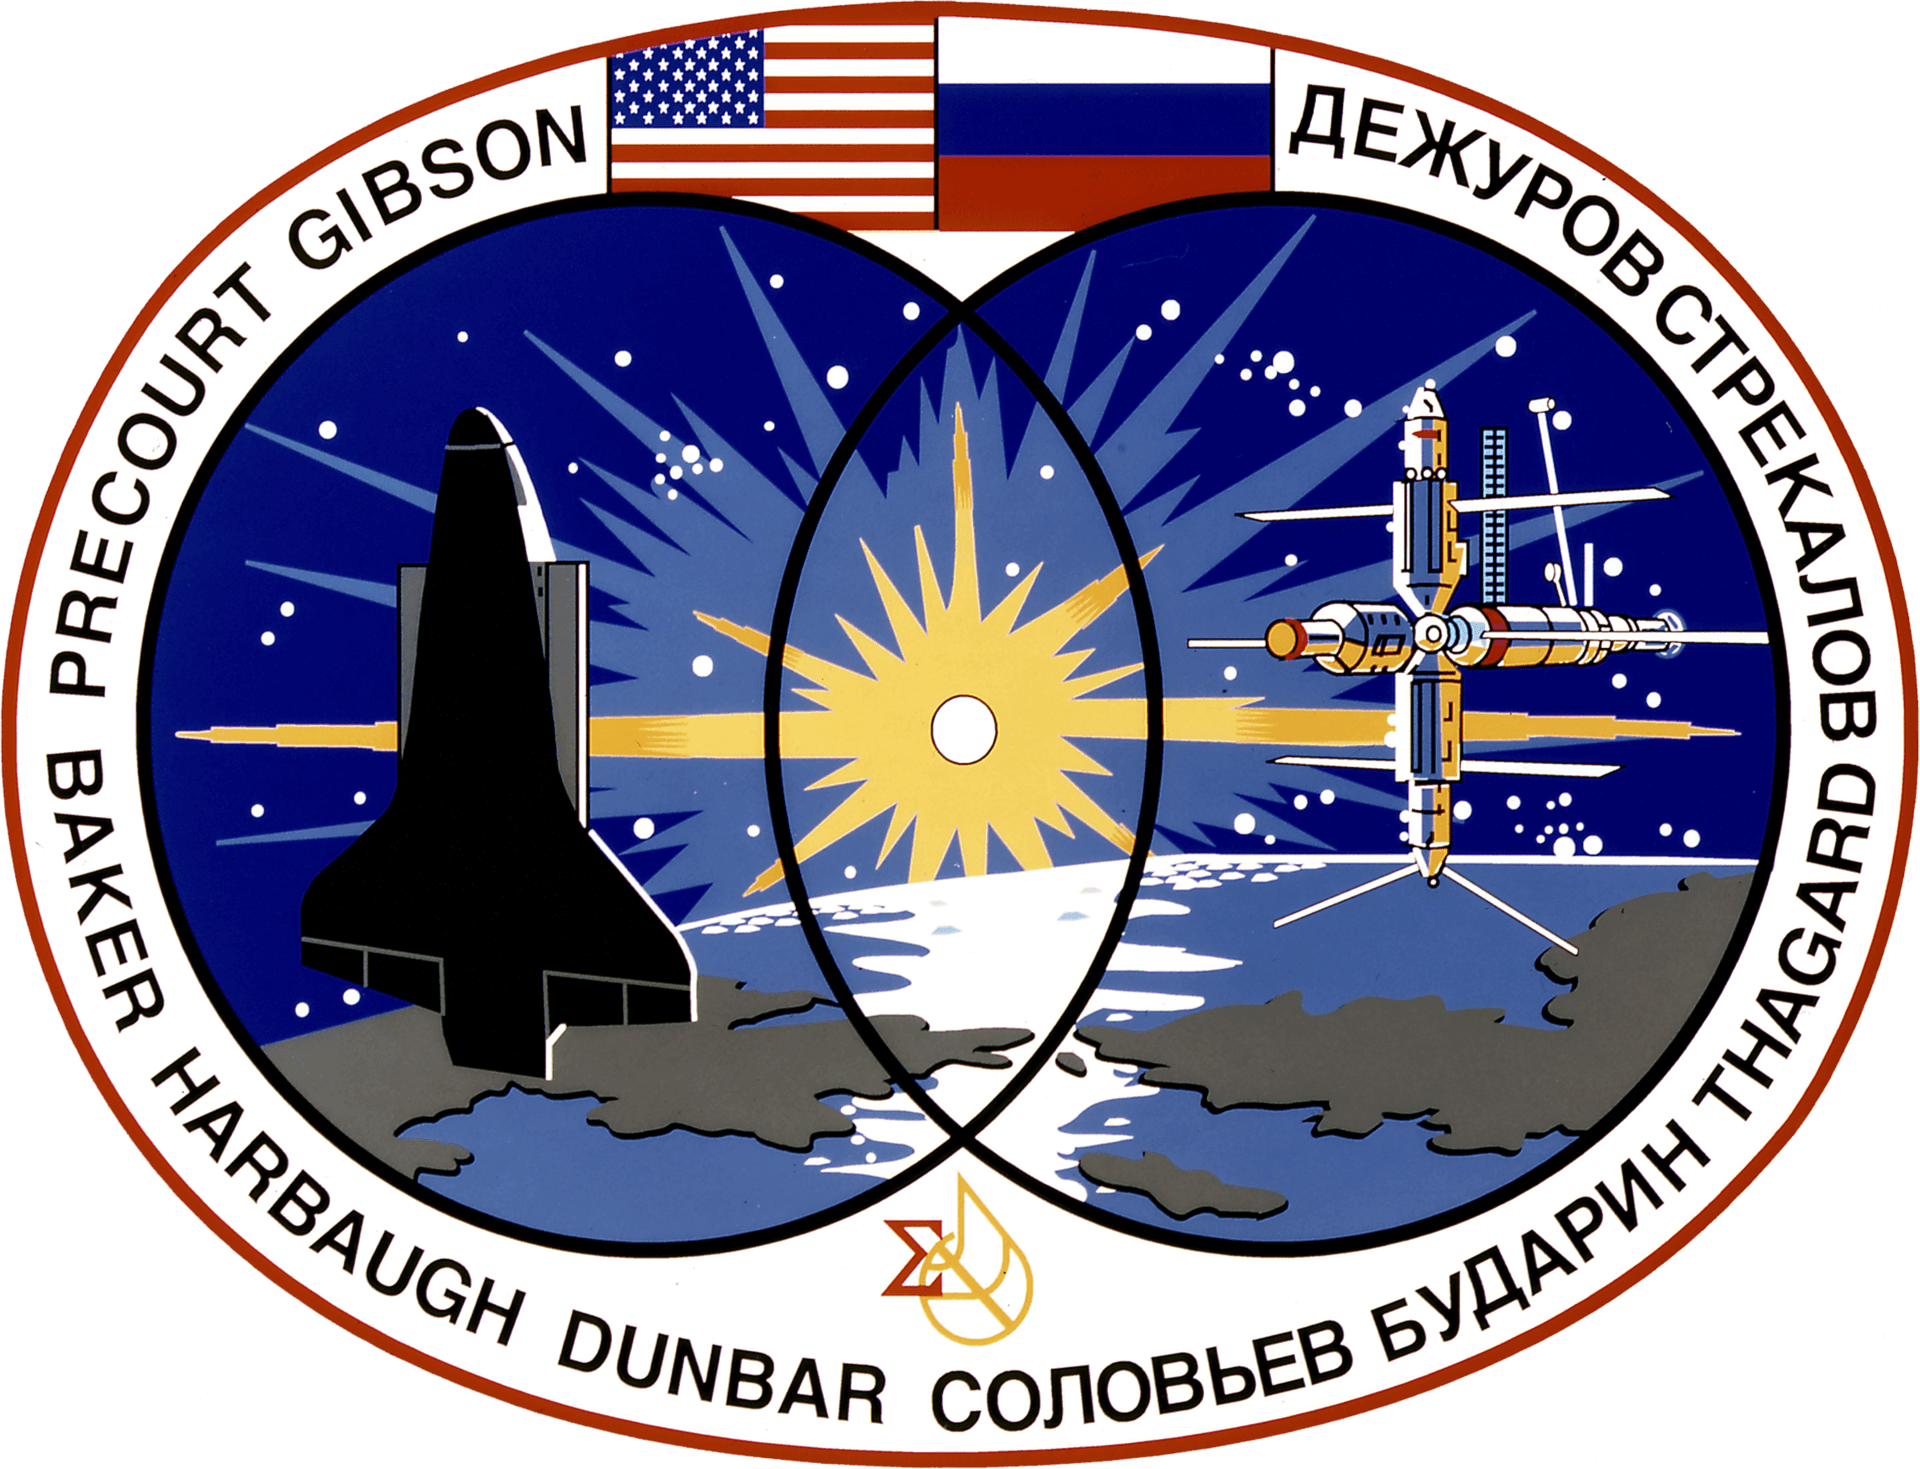 Mission patch for STS-71